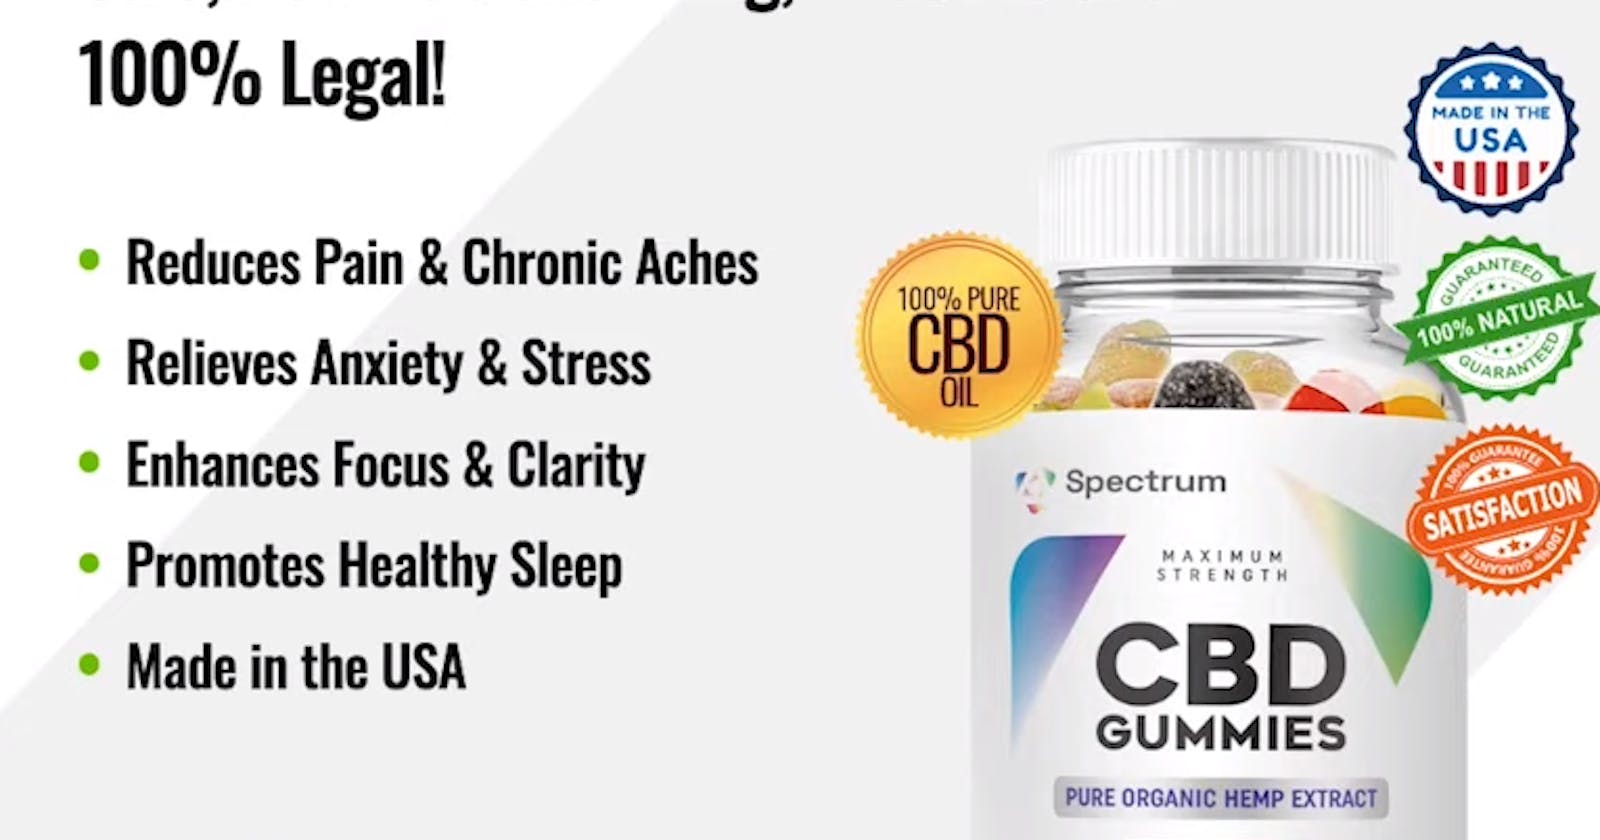 Spectrum CBD Gummies (Review) Alleviates Anxiety & Depression! Special Offer Today